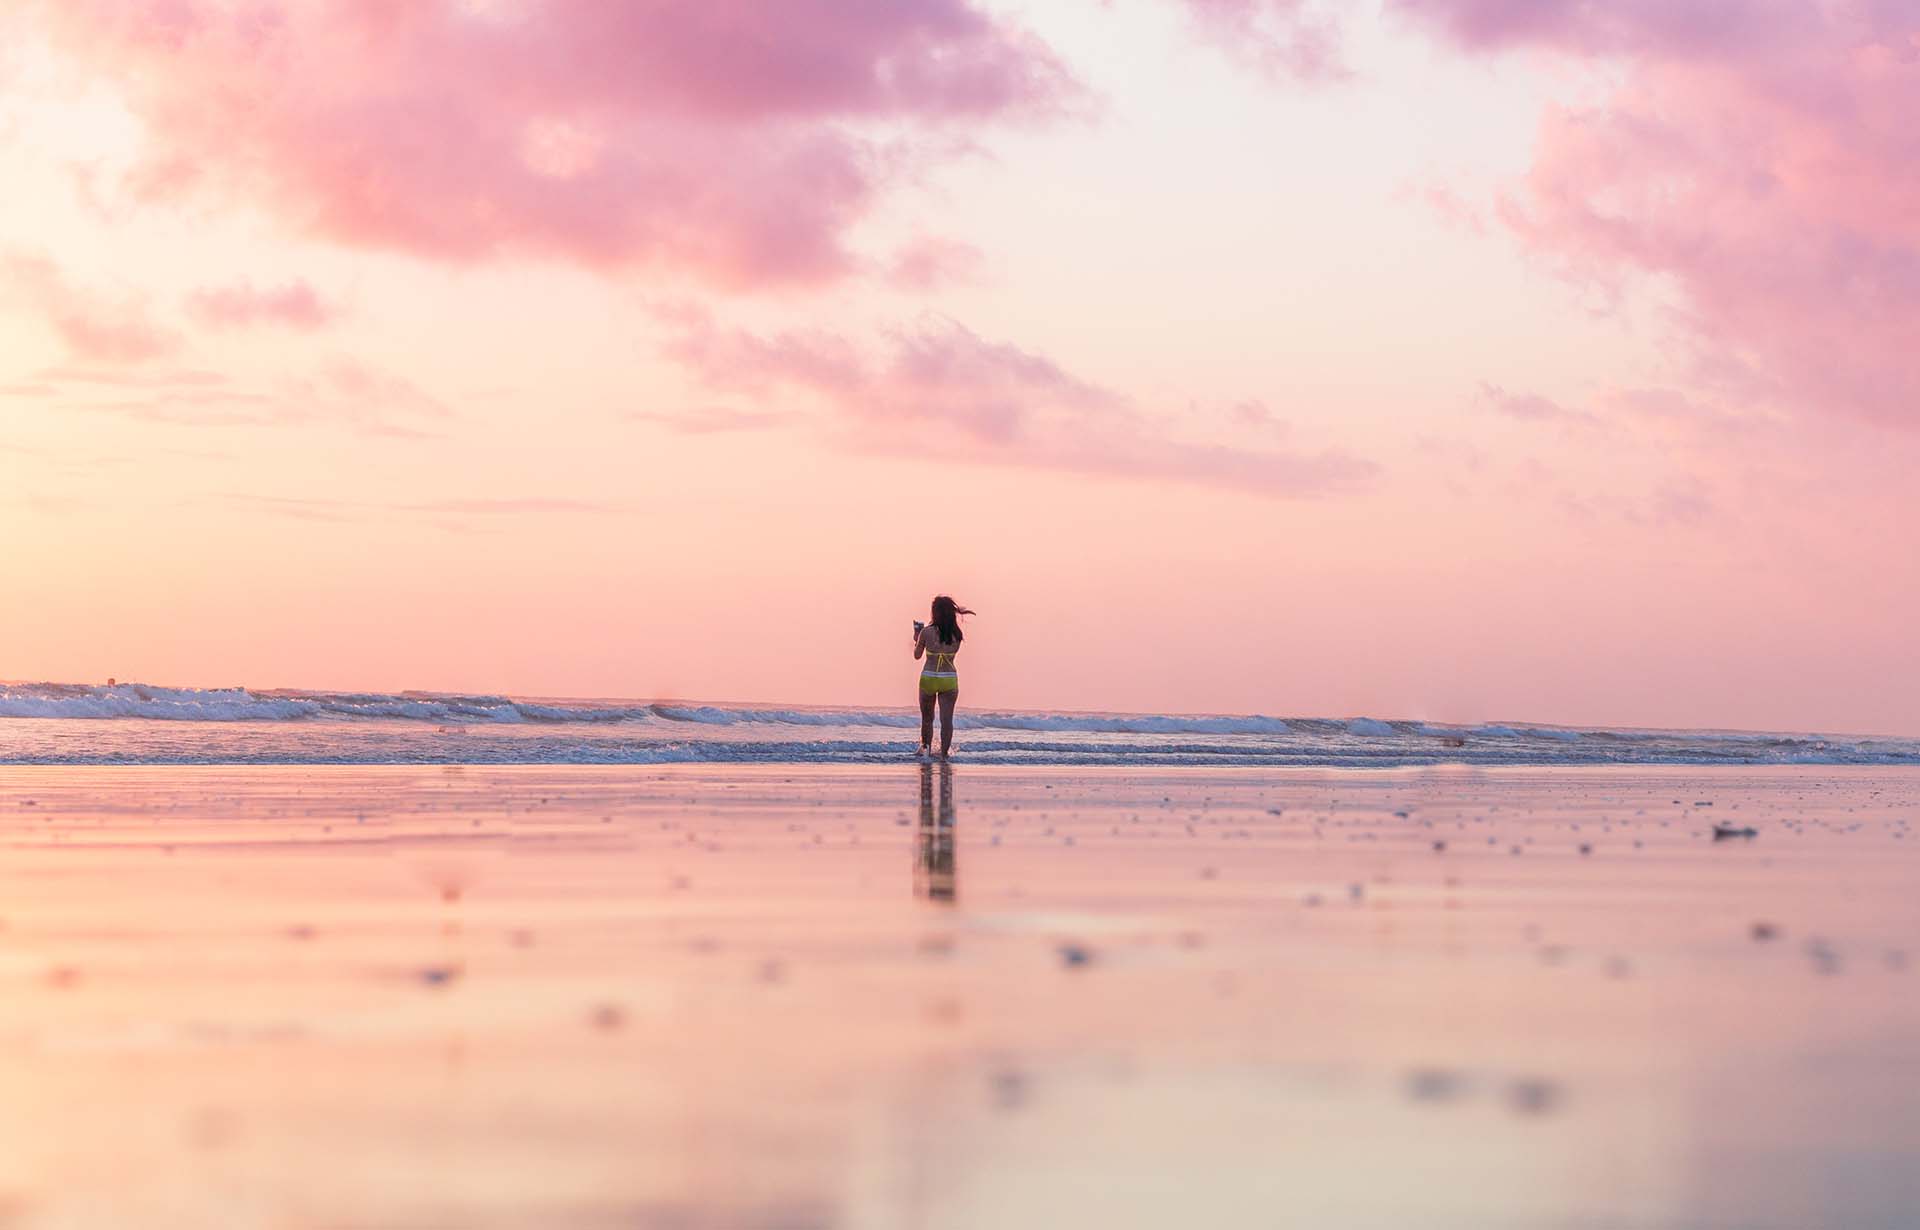 Woman on the beach with pink atmosphere - Header Image for the You are Enough Blog Post